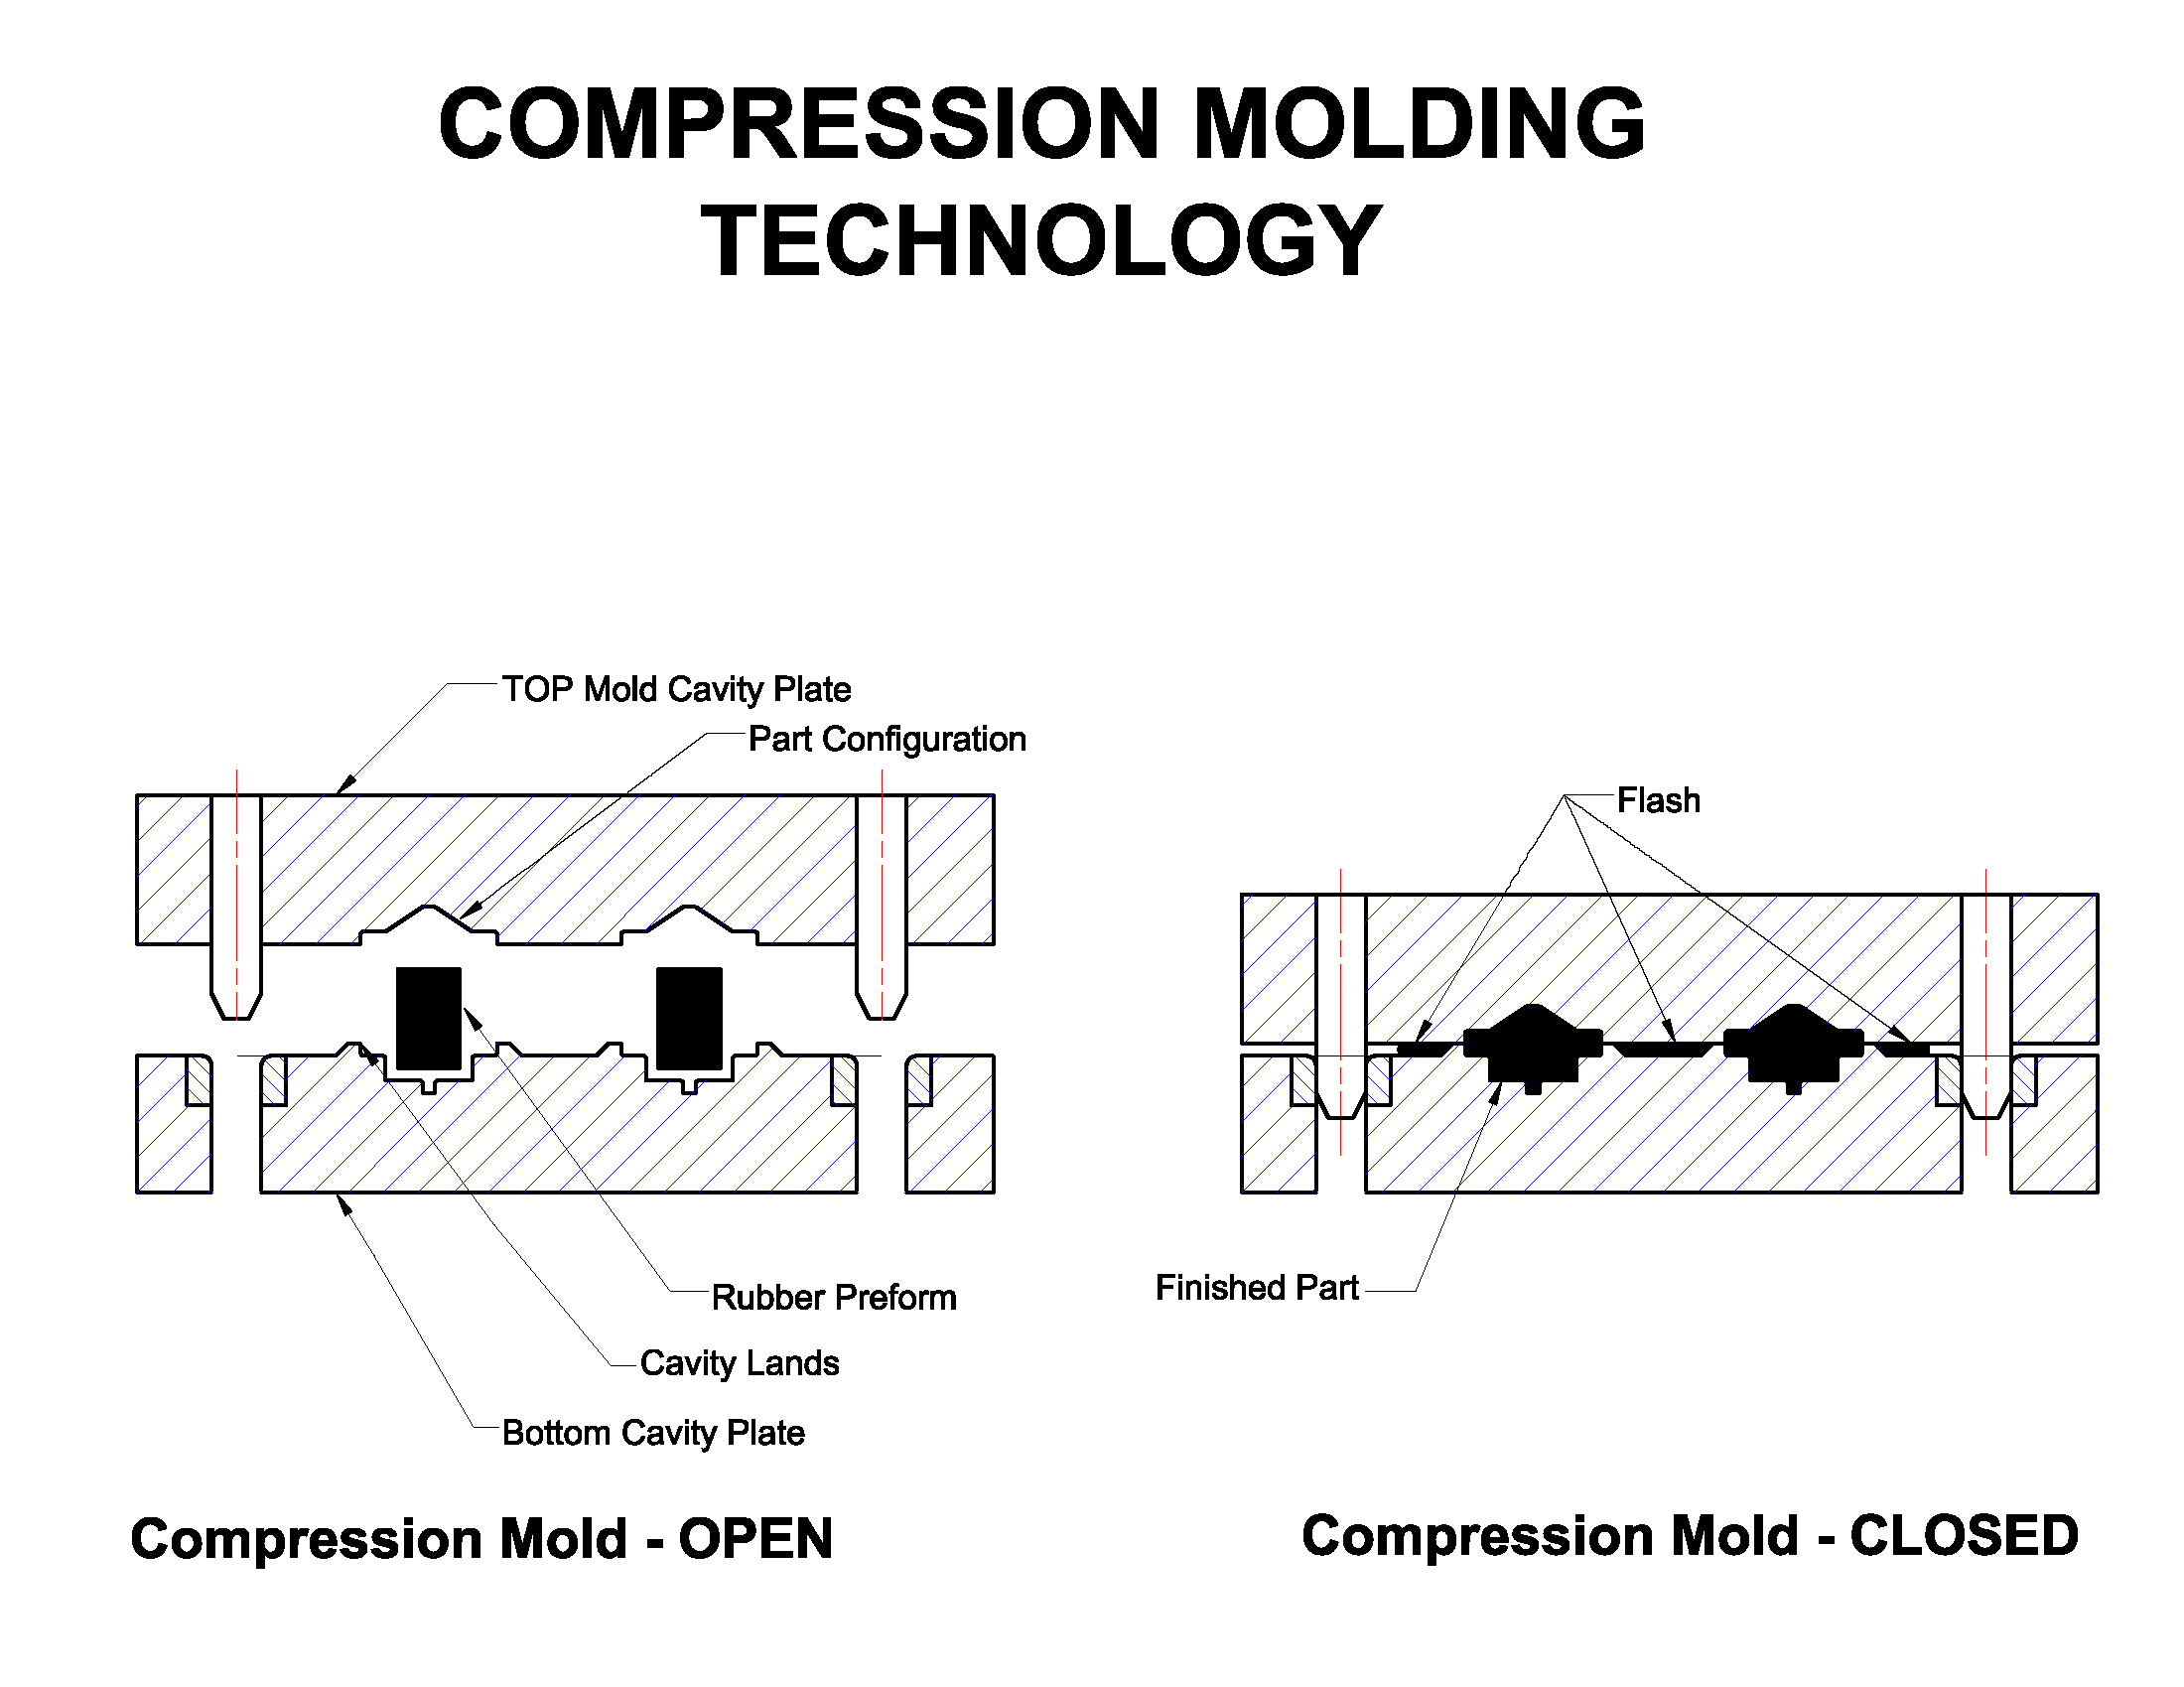 Picture of compression molding tool